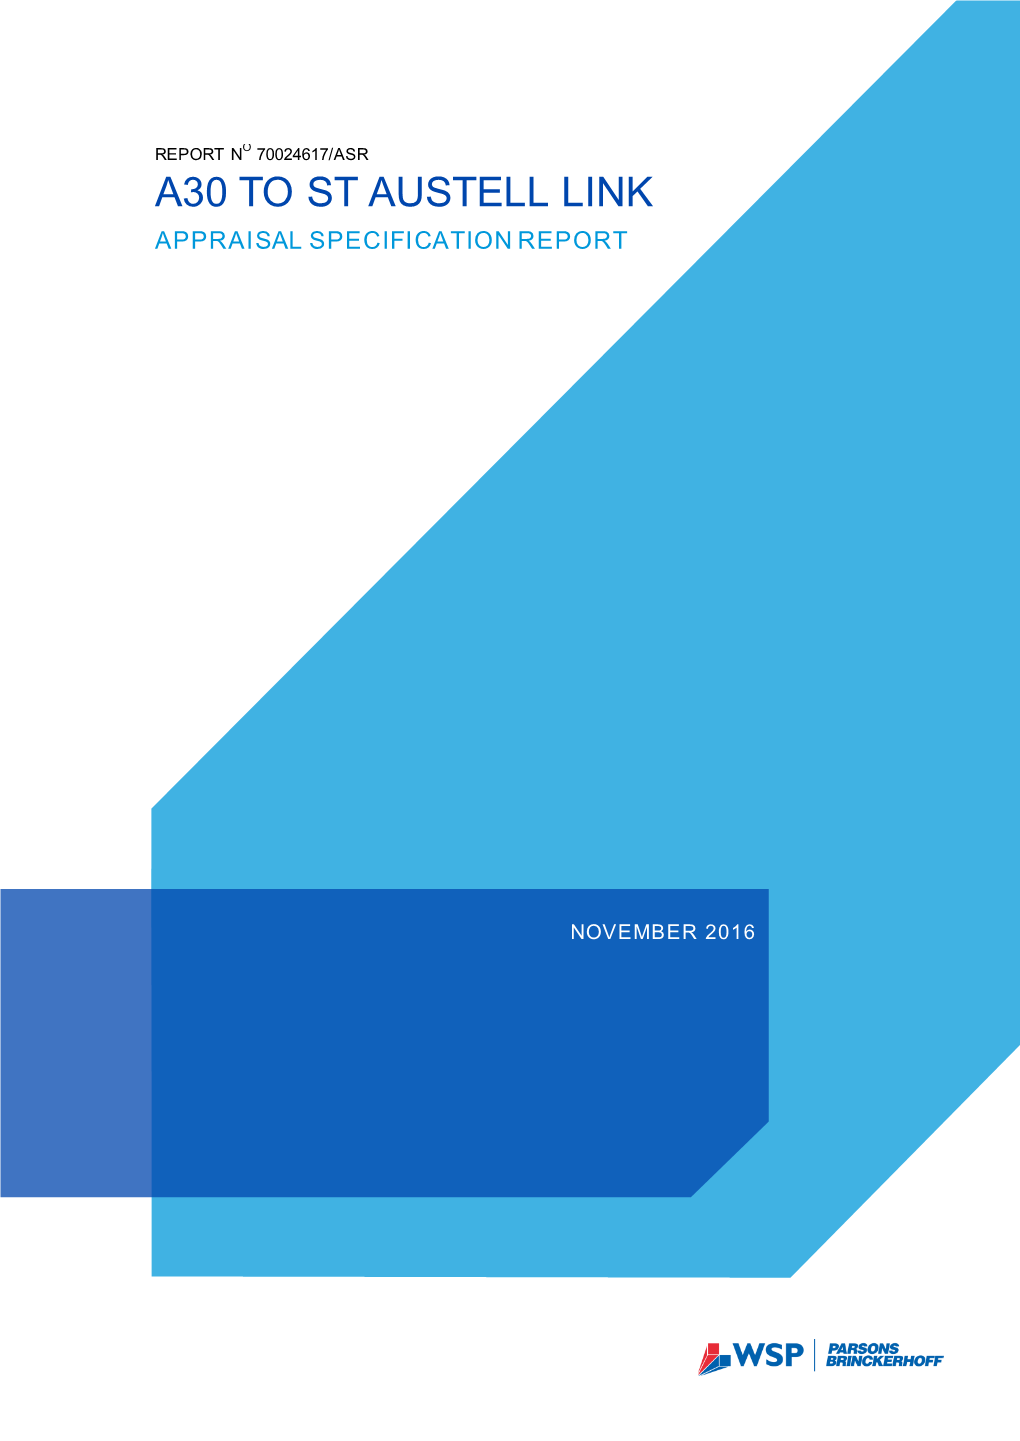 4.15 C3 Appraisal Specification Report